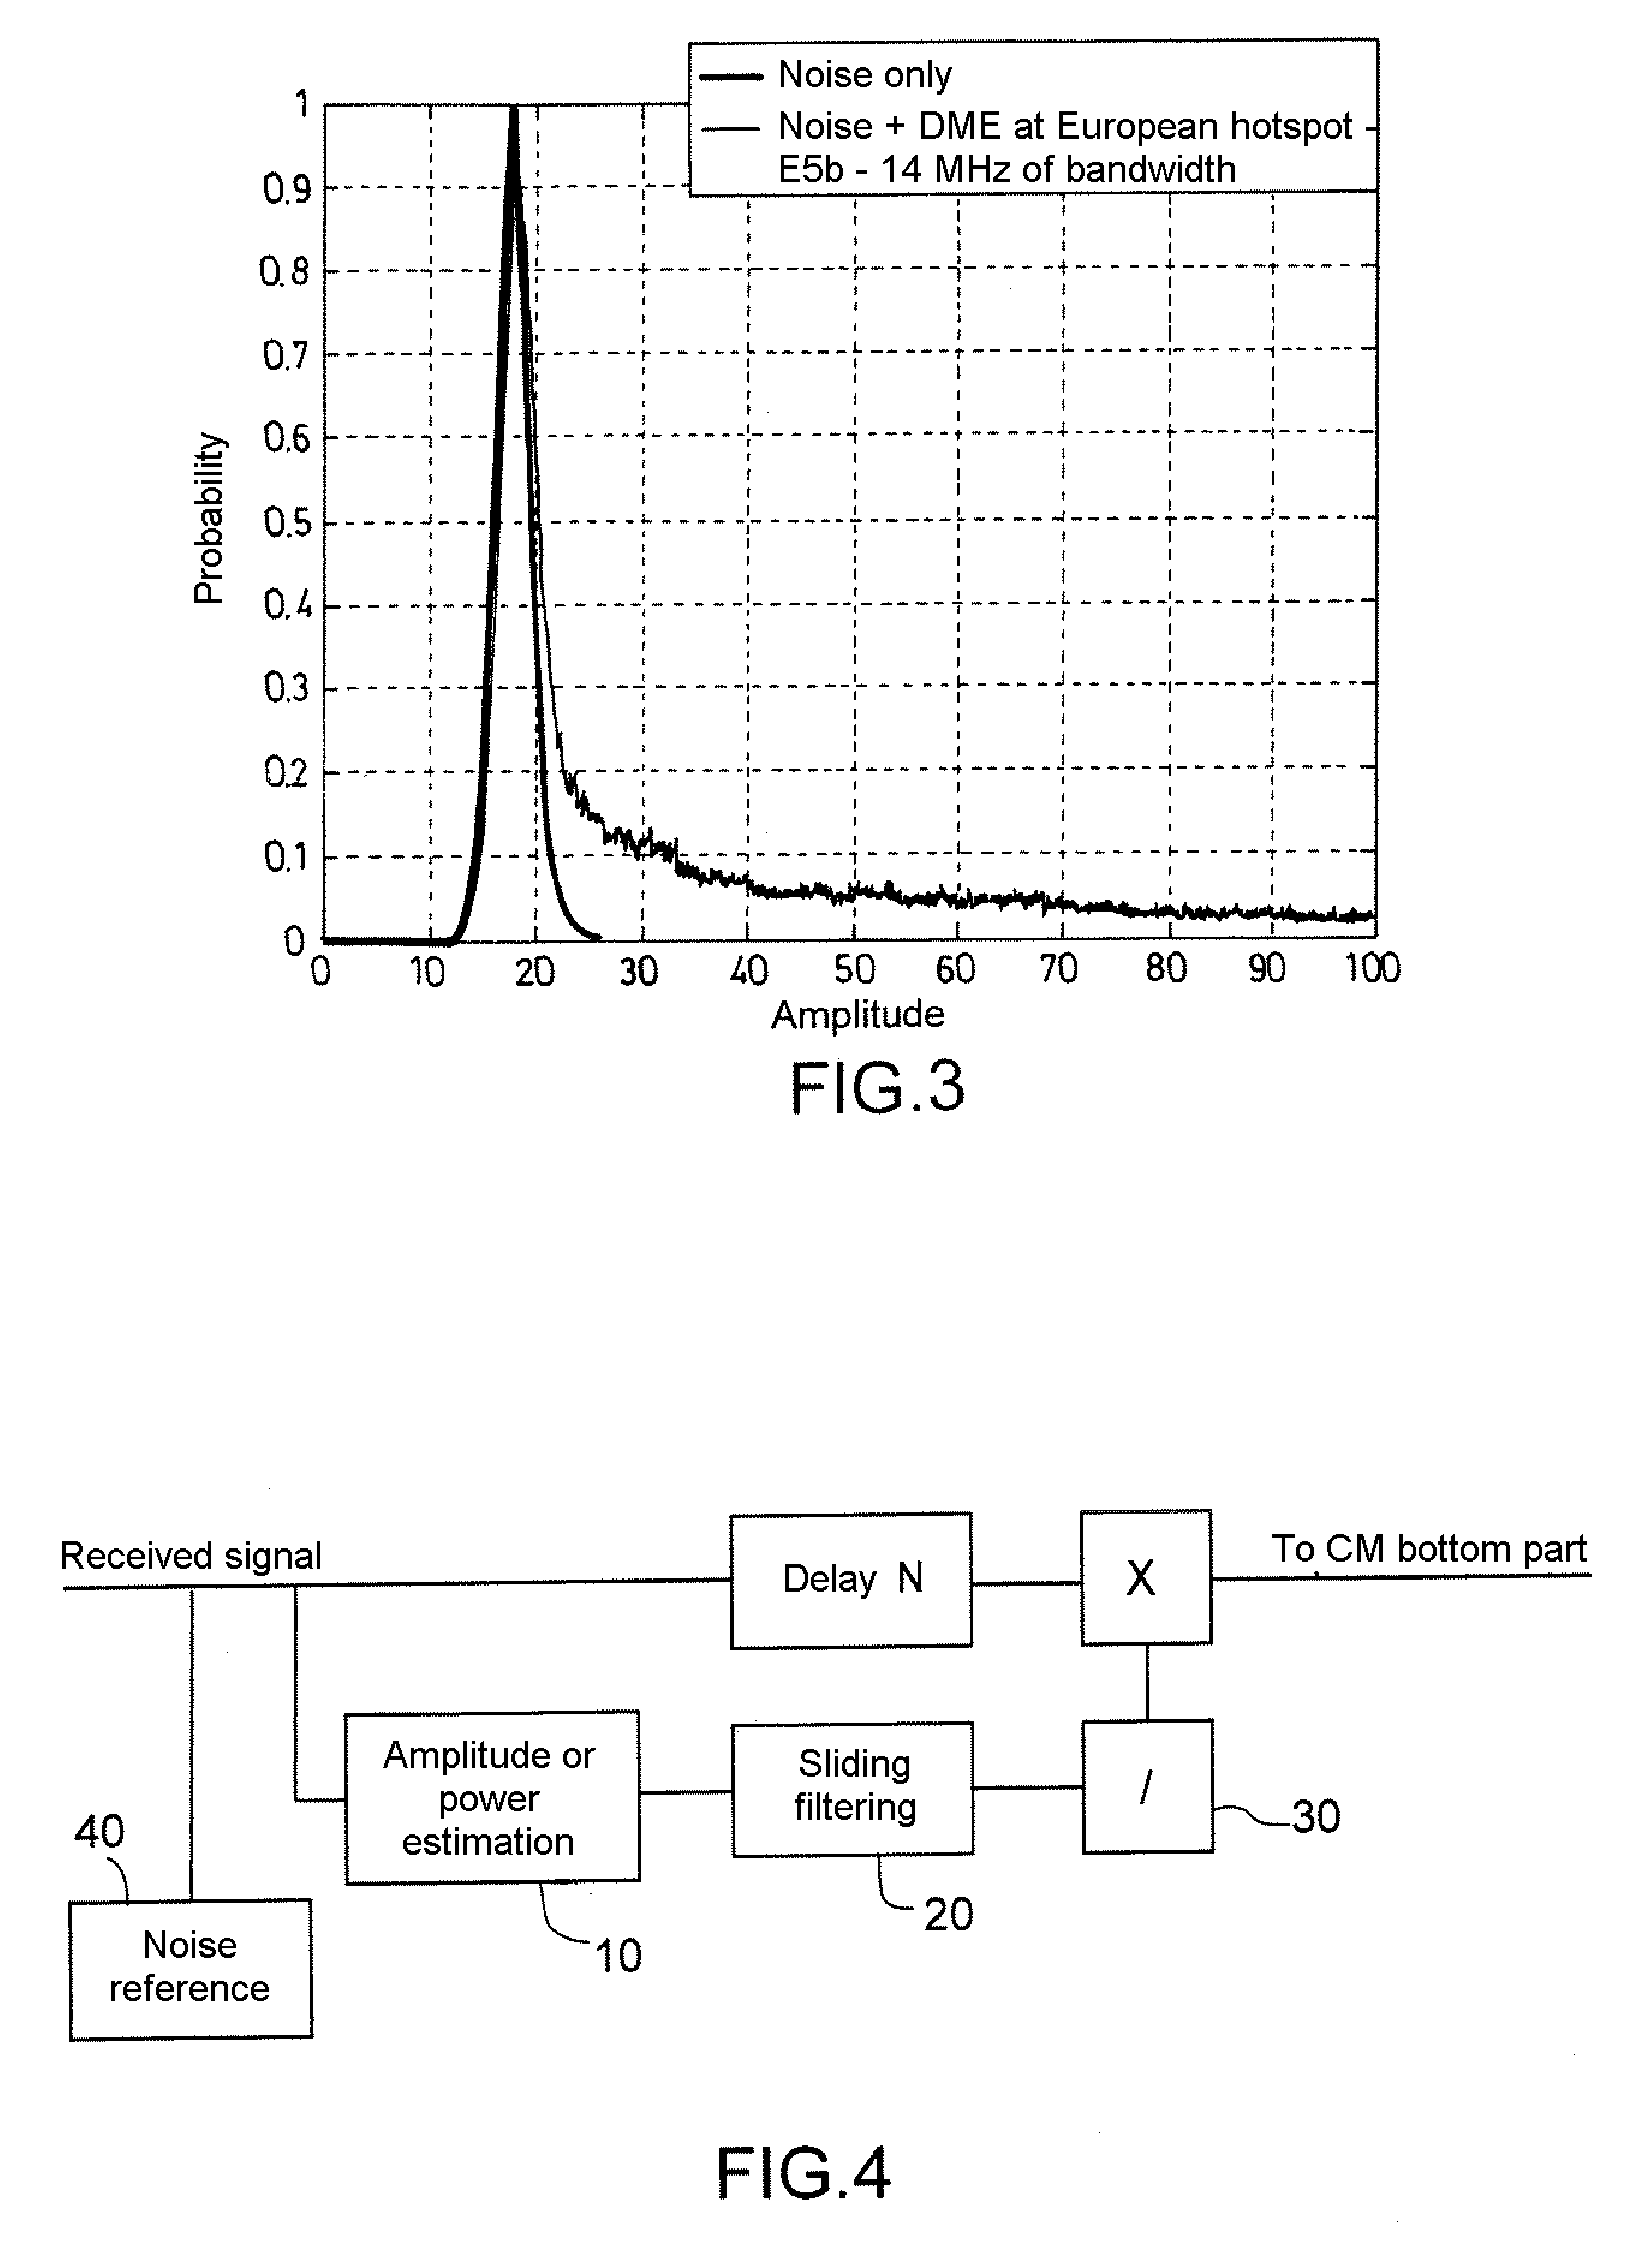 Processing of interference on a radiofrequency signal by power inversion